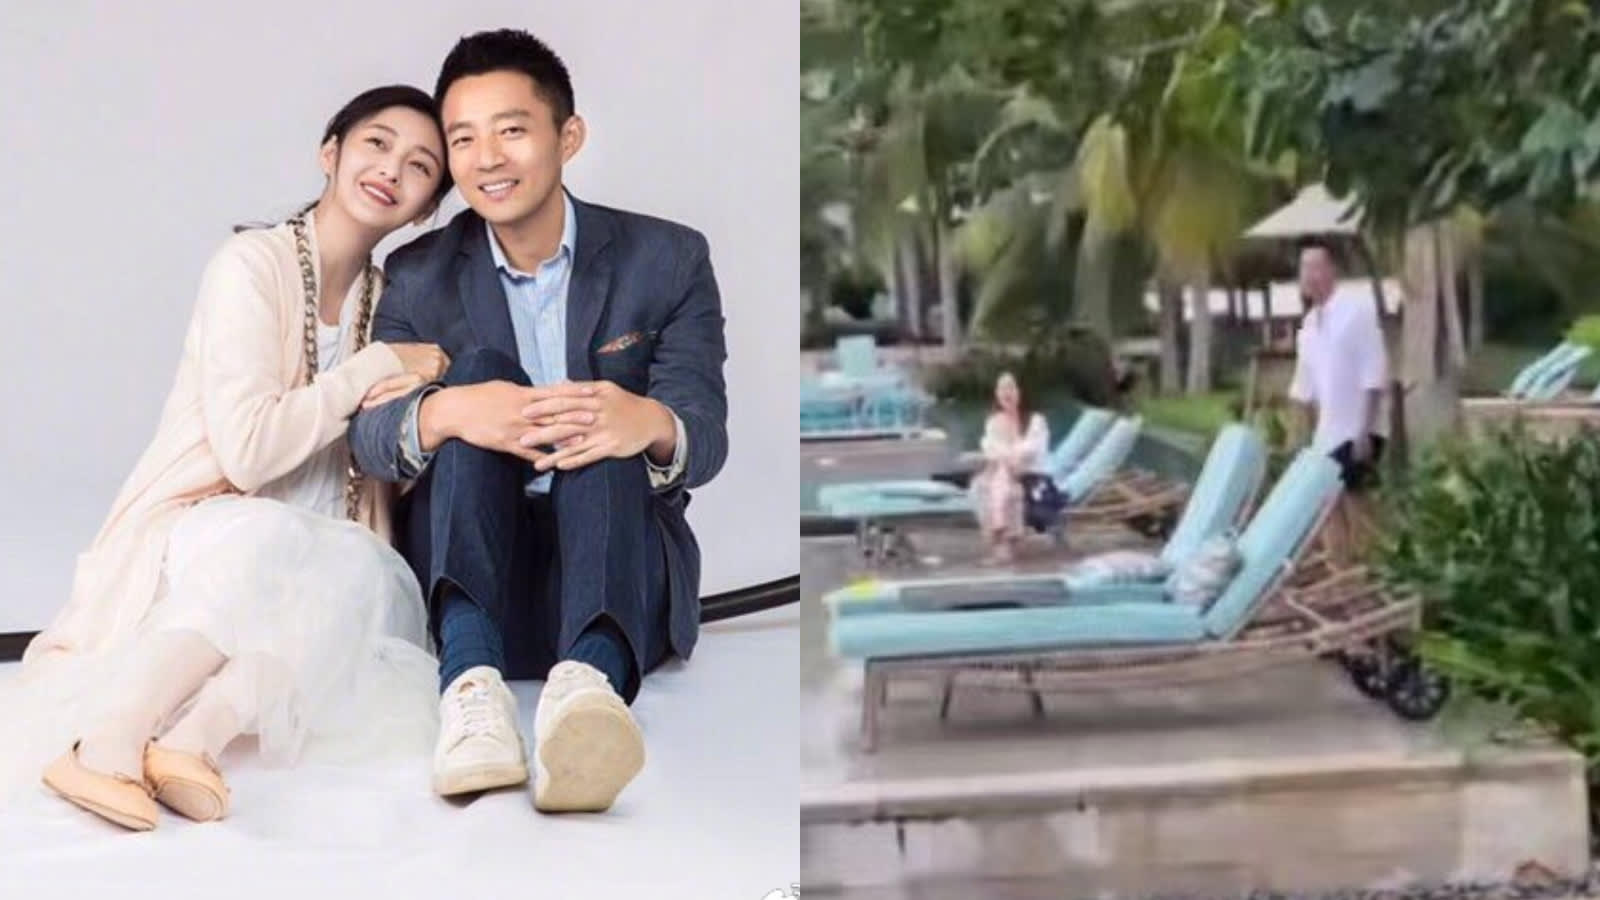 Netizen Posts Clip Of Barbie Hsu’s Ex-Husband Wang Xiaofei Talking To Woman At Poolside A Week After The Couple Announced Their Divorce